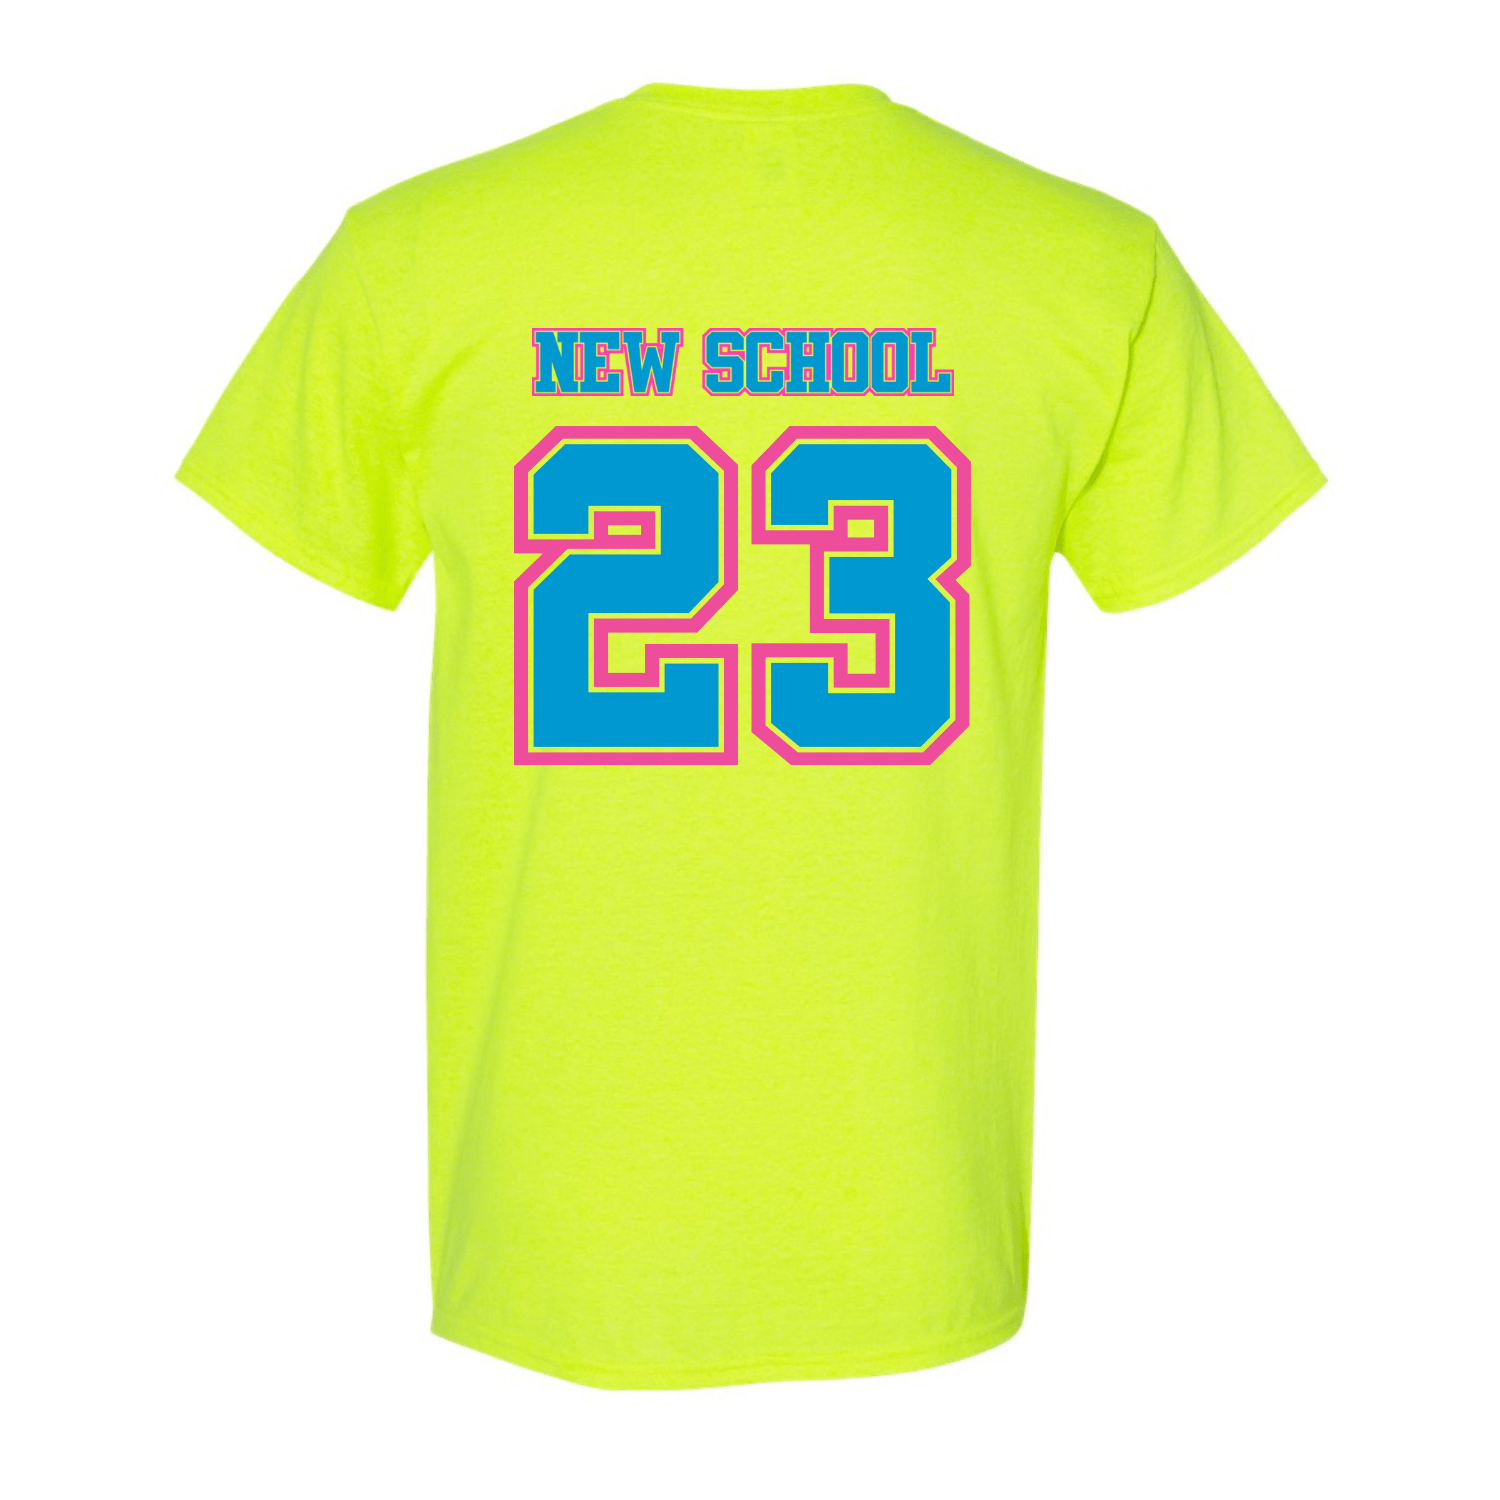 Wild 'N Out Neon Yellow New School Adult Short Sleeve T - Shirt - Paramount Shop